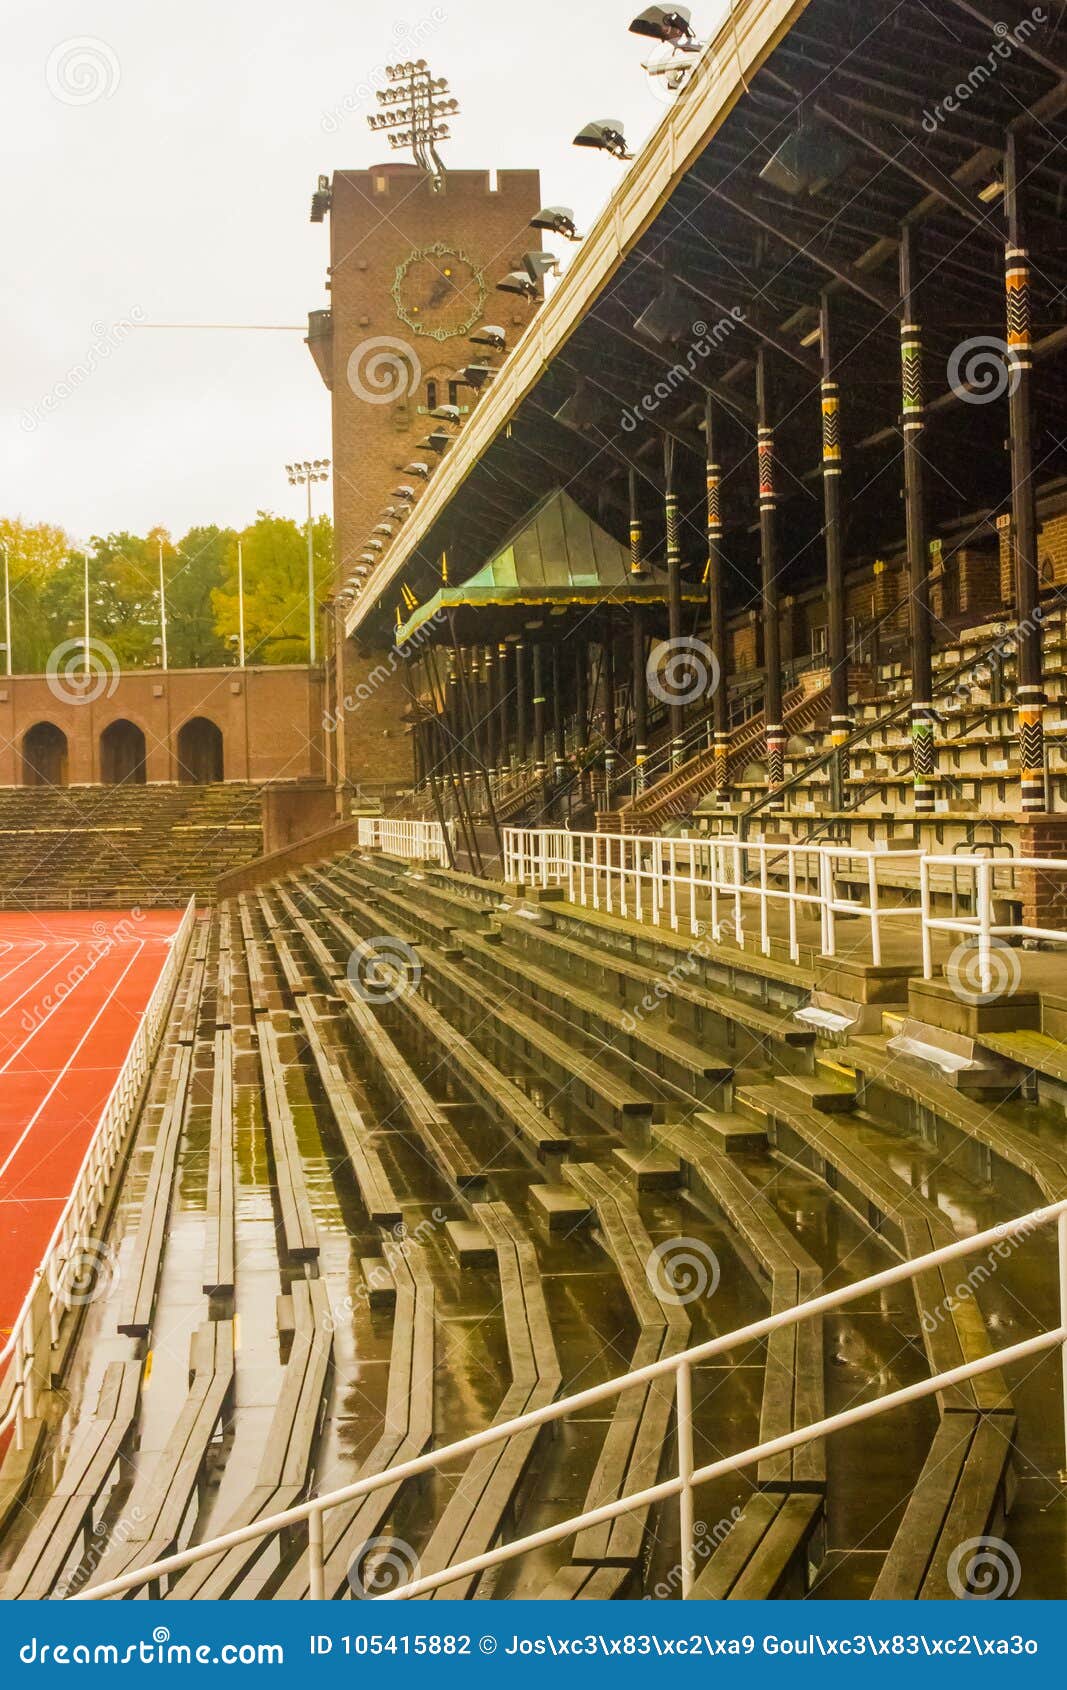 stockholm olympic stadium: the eastern bench, the royal tribune and the tower